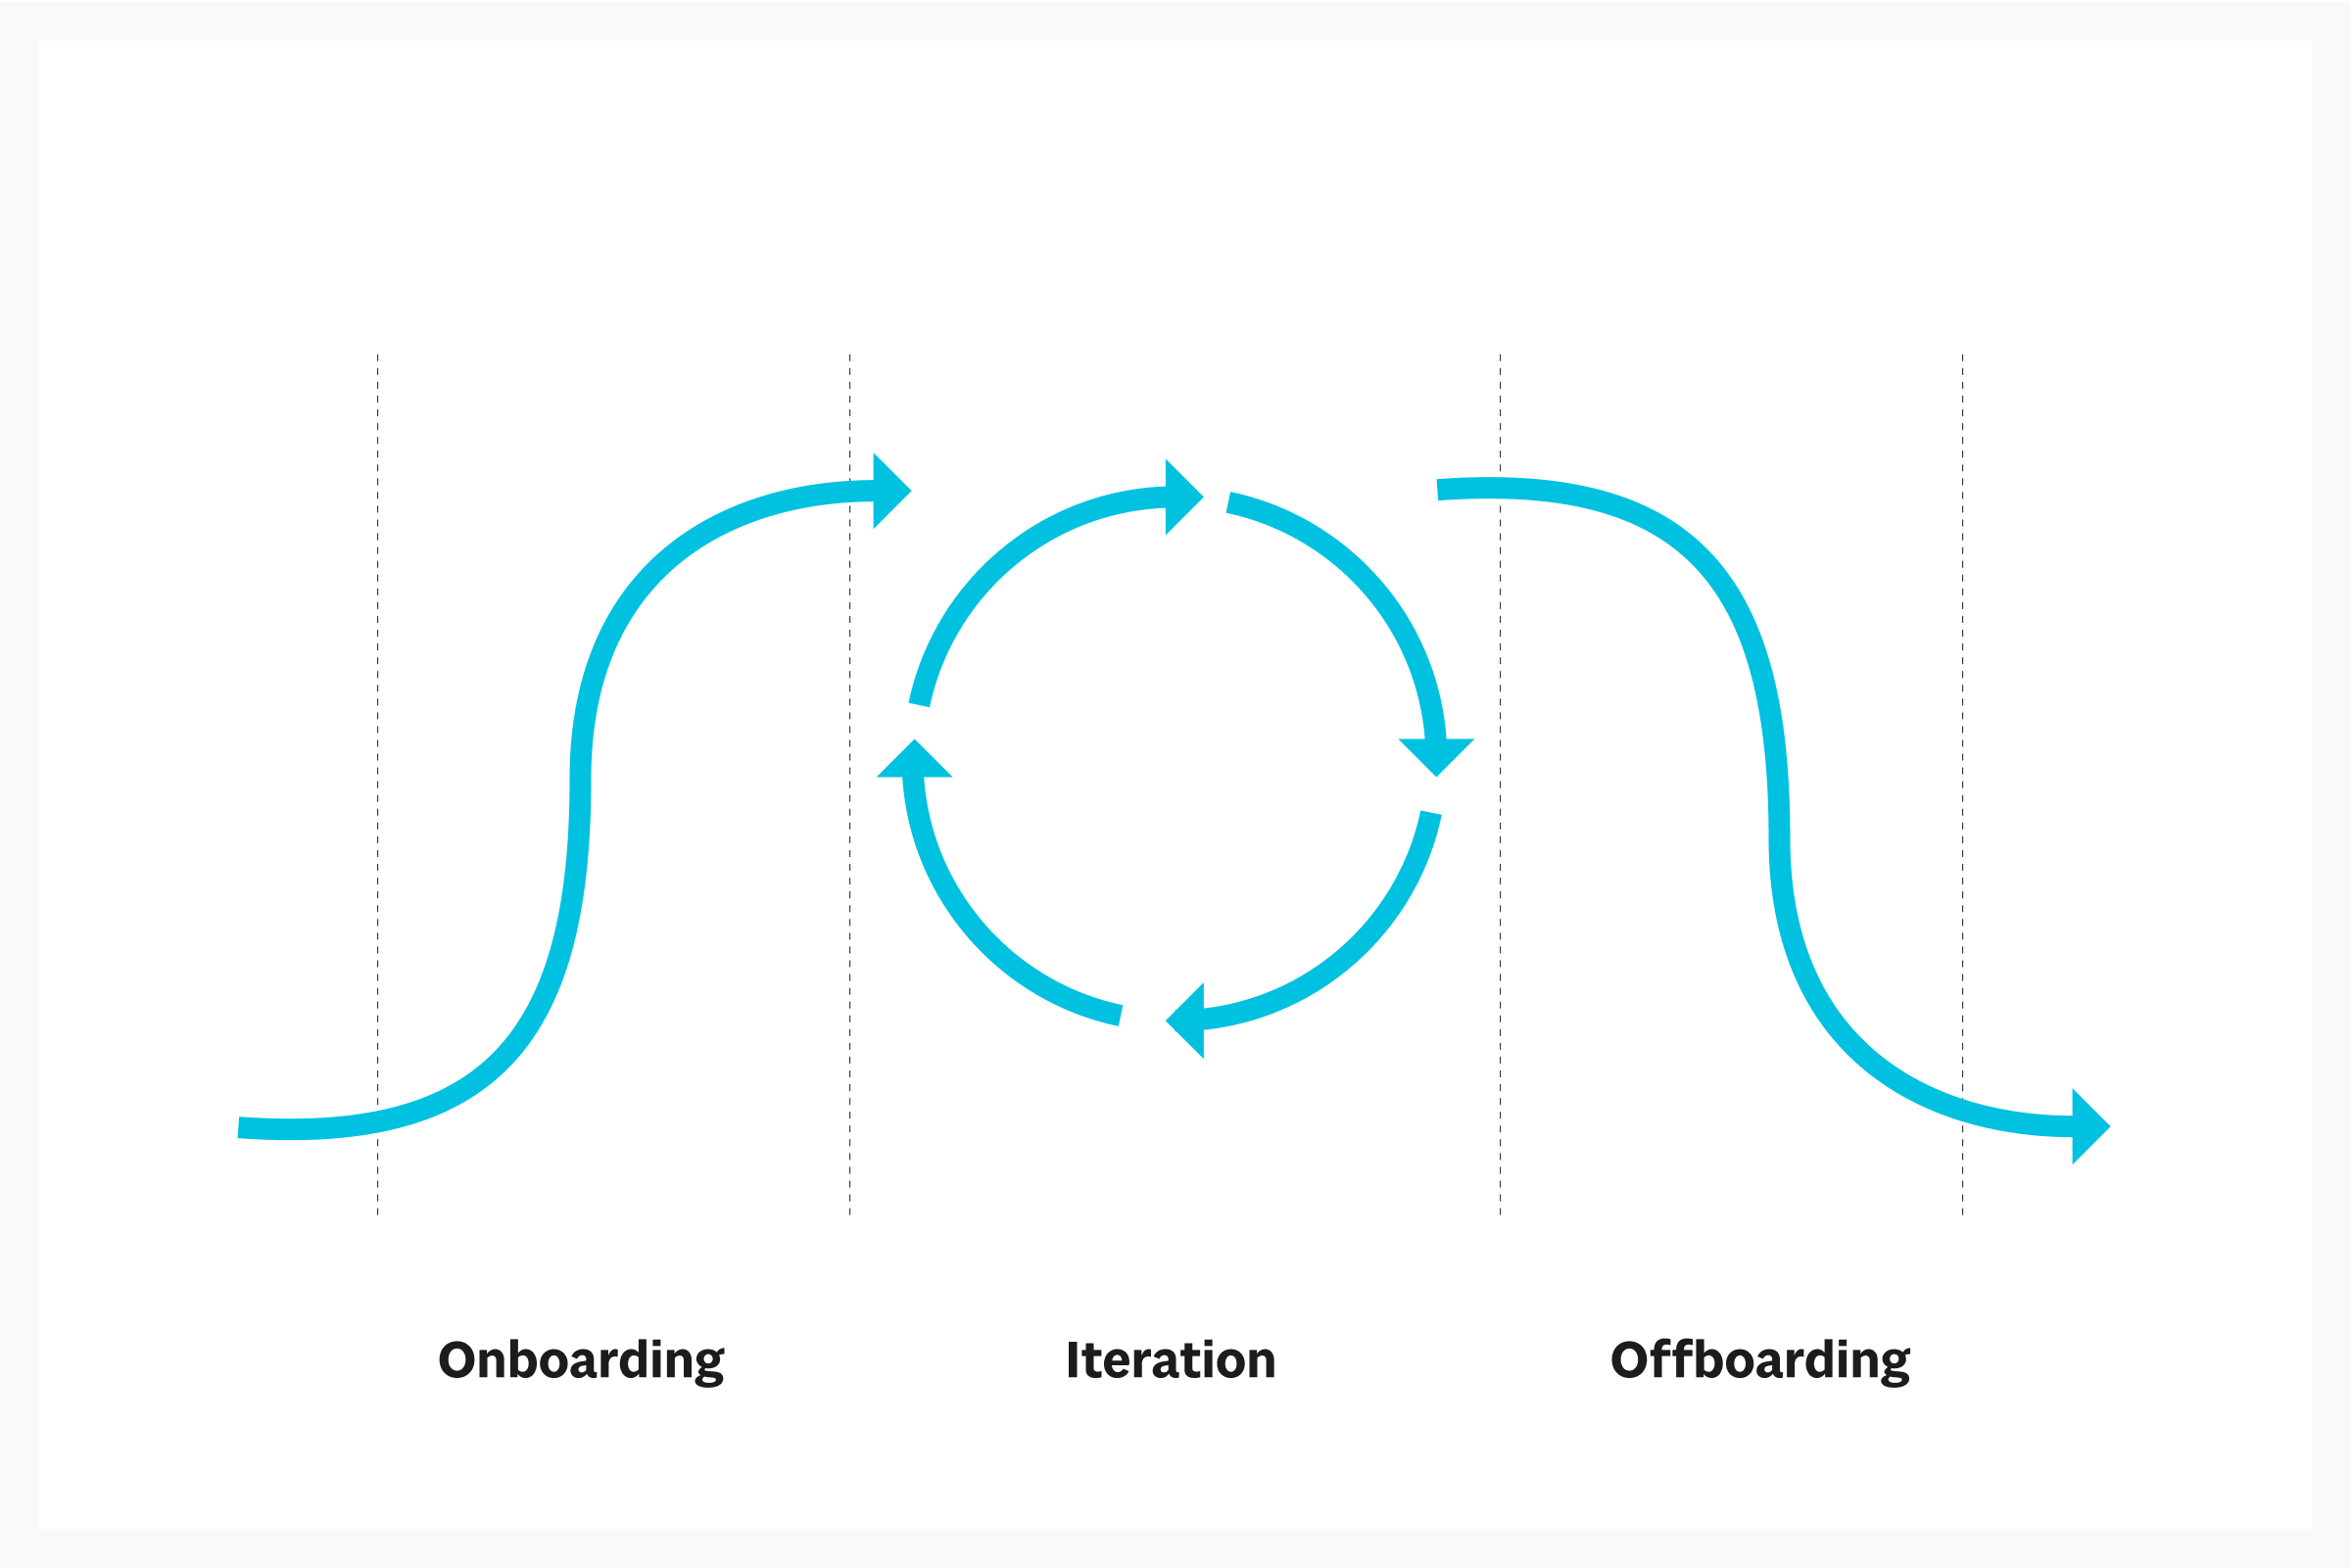 A chart separated in to three equal sections displaying a teal line arrow in a uphill motion representing onboarding in the first section, four teal line arrows in a circular motion representing iteration in the second section, and a teal line arrow in a downhill motion representing offboarding in the third section.